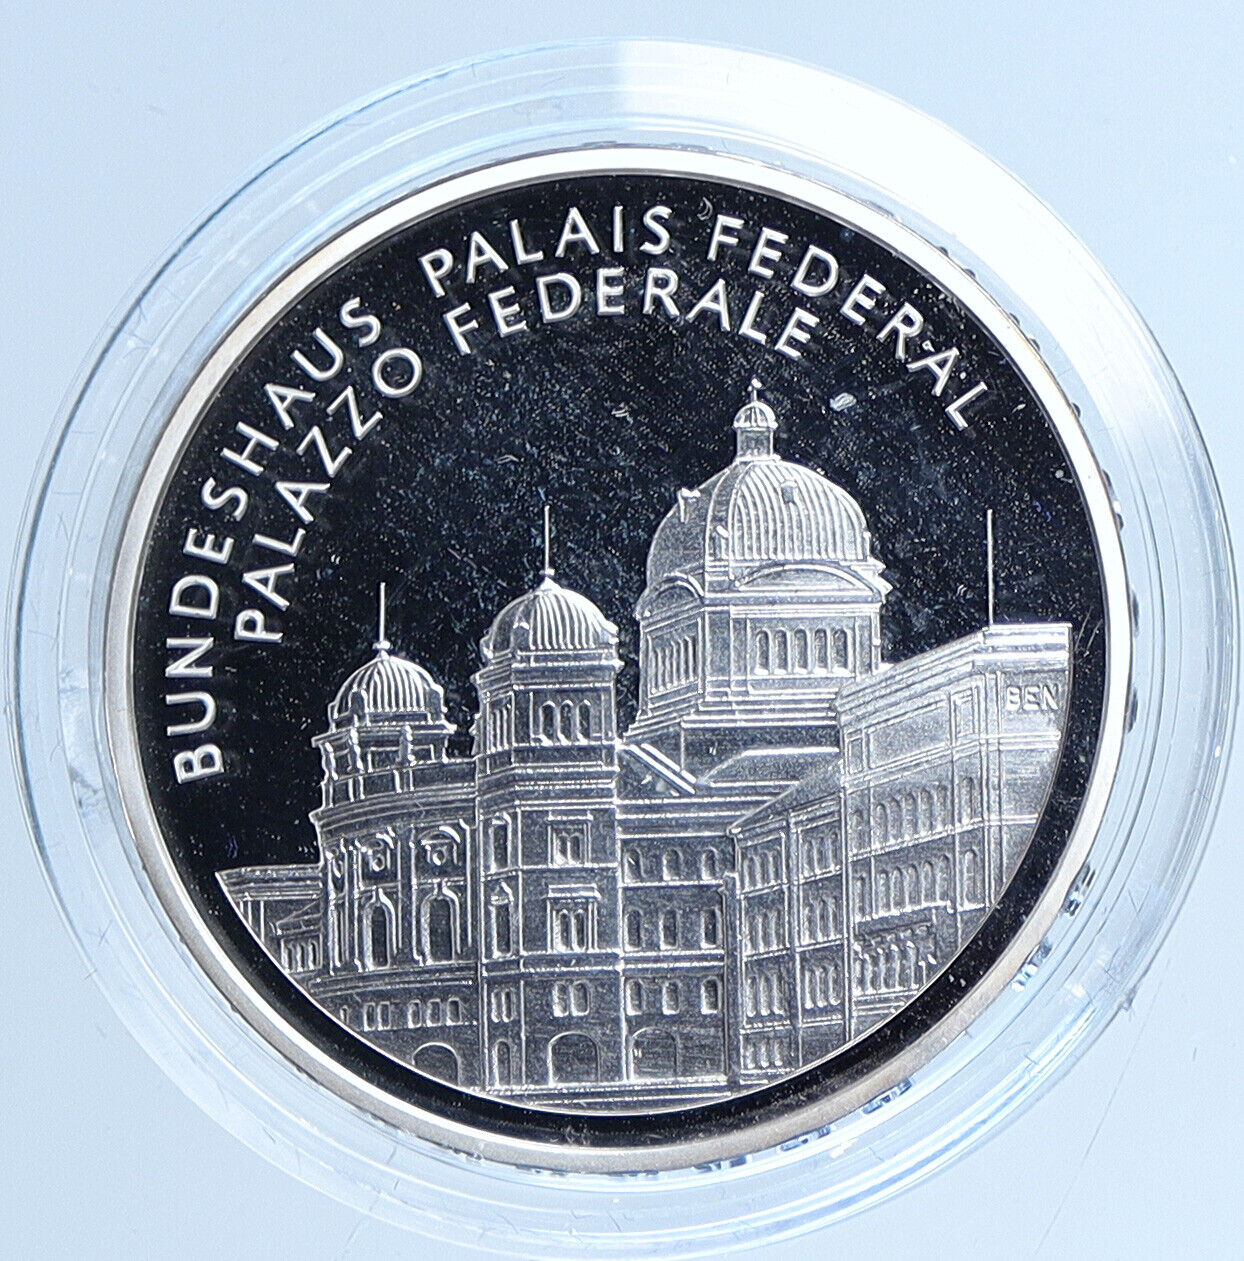 2006 Switzerland SWISS FEDERAL PALACE Old Proof Silver 20 Francs Coin i113532